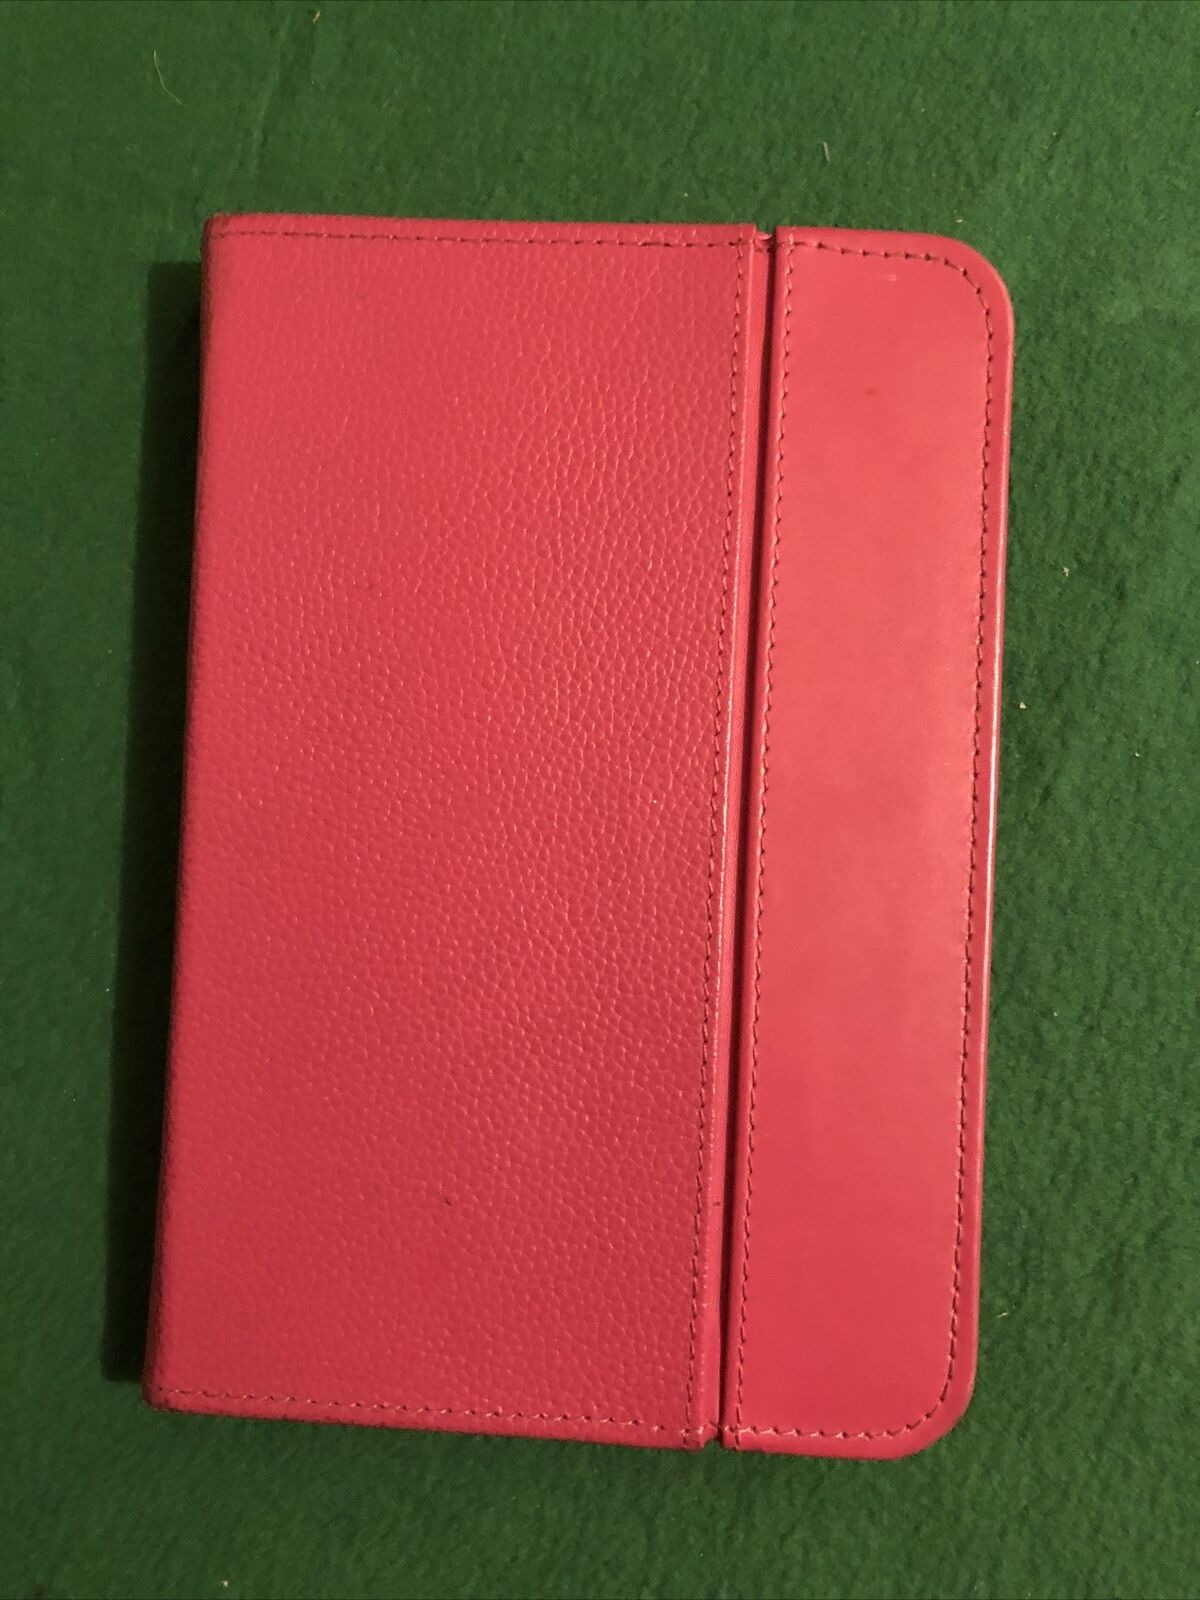 Case Crown Pink Leather Kindle Case Size 7 3/4